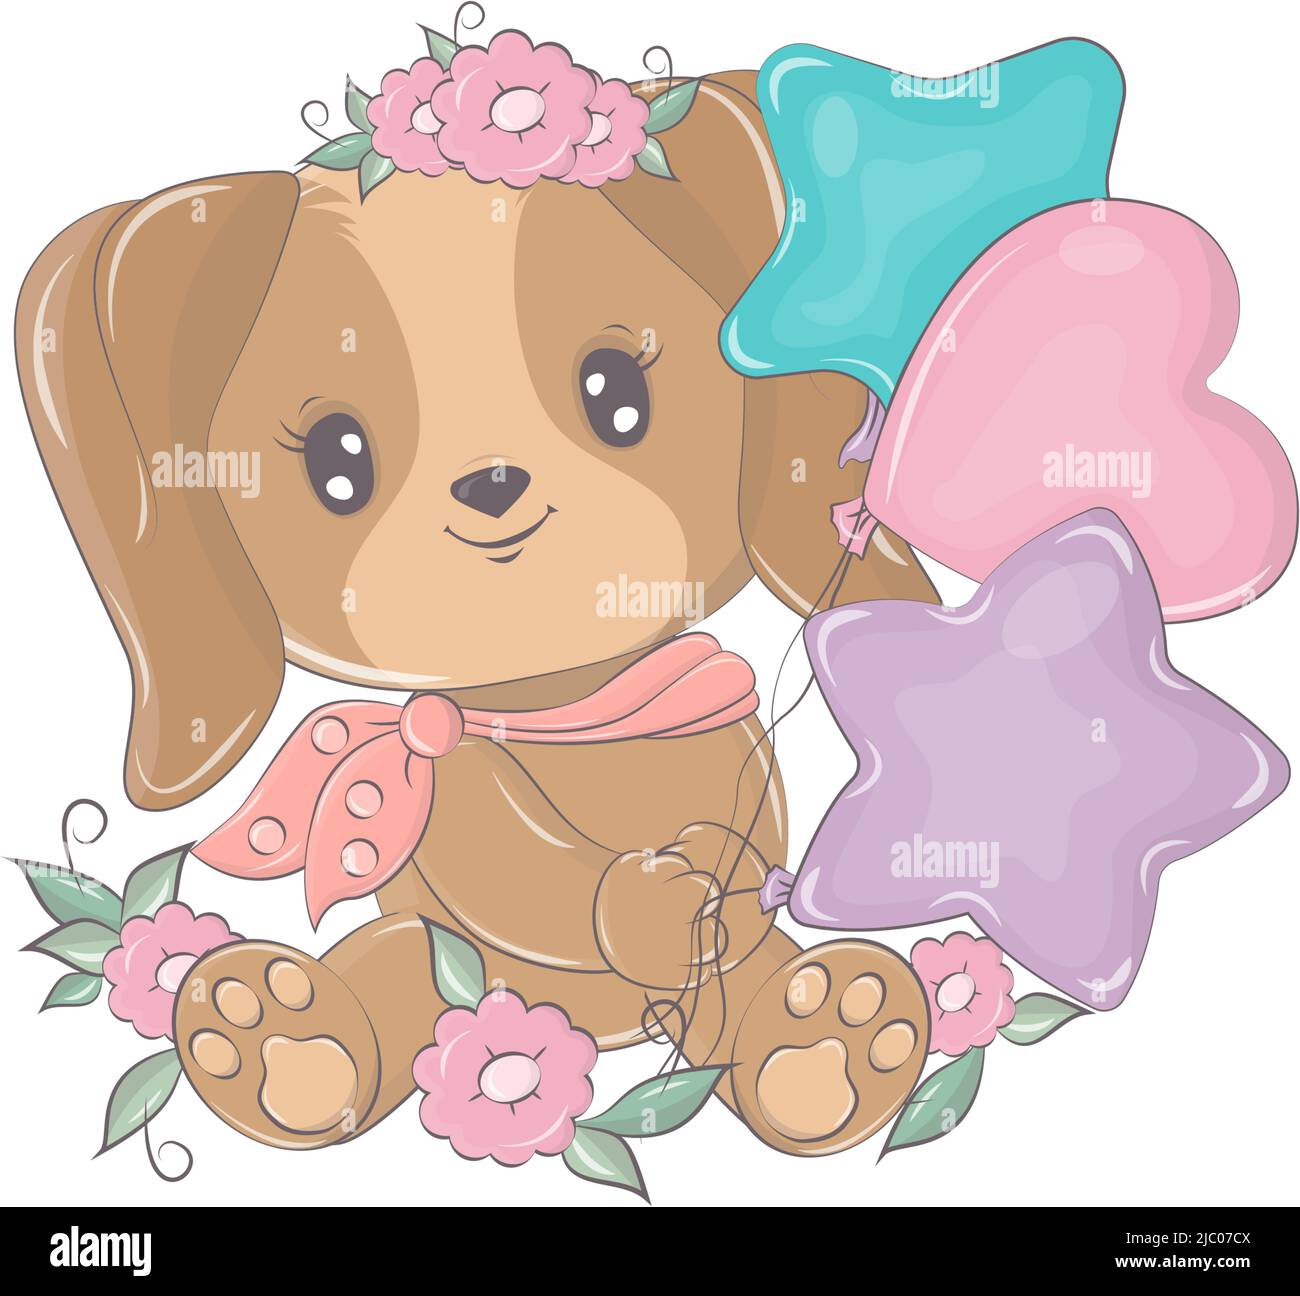 Vector images of a Dog in kawaii style. The cartoon character is made for a kids group of goods. The funny animal smiles cutely. Animal isolated on Stock Vector